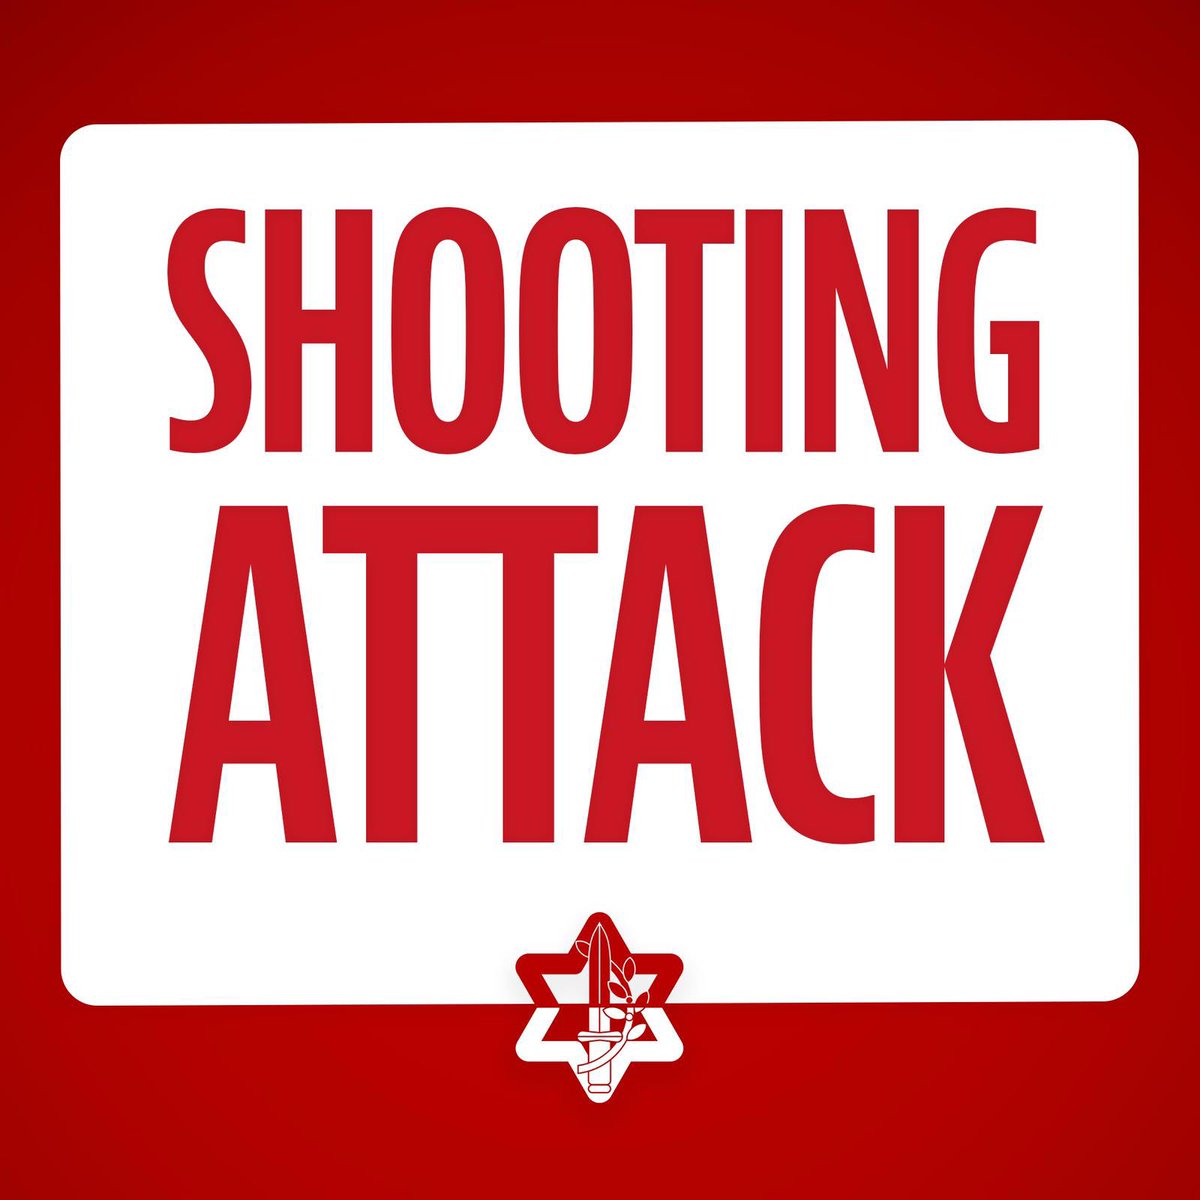 2 civilians were lightly injured from glass shrapnel in a shooting attack at the Bitot Junction. IDF soldiers are pursuing the terrorists and have set up roadblocks in the area.